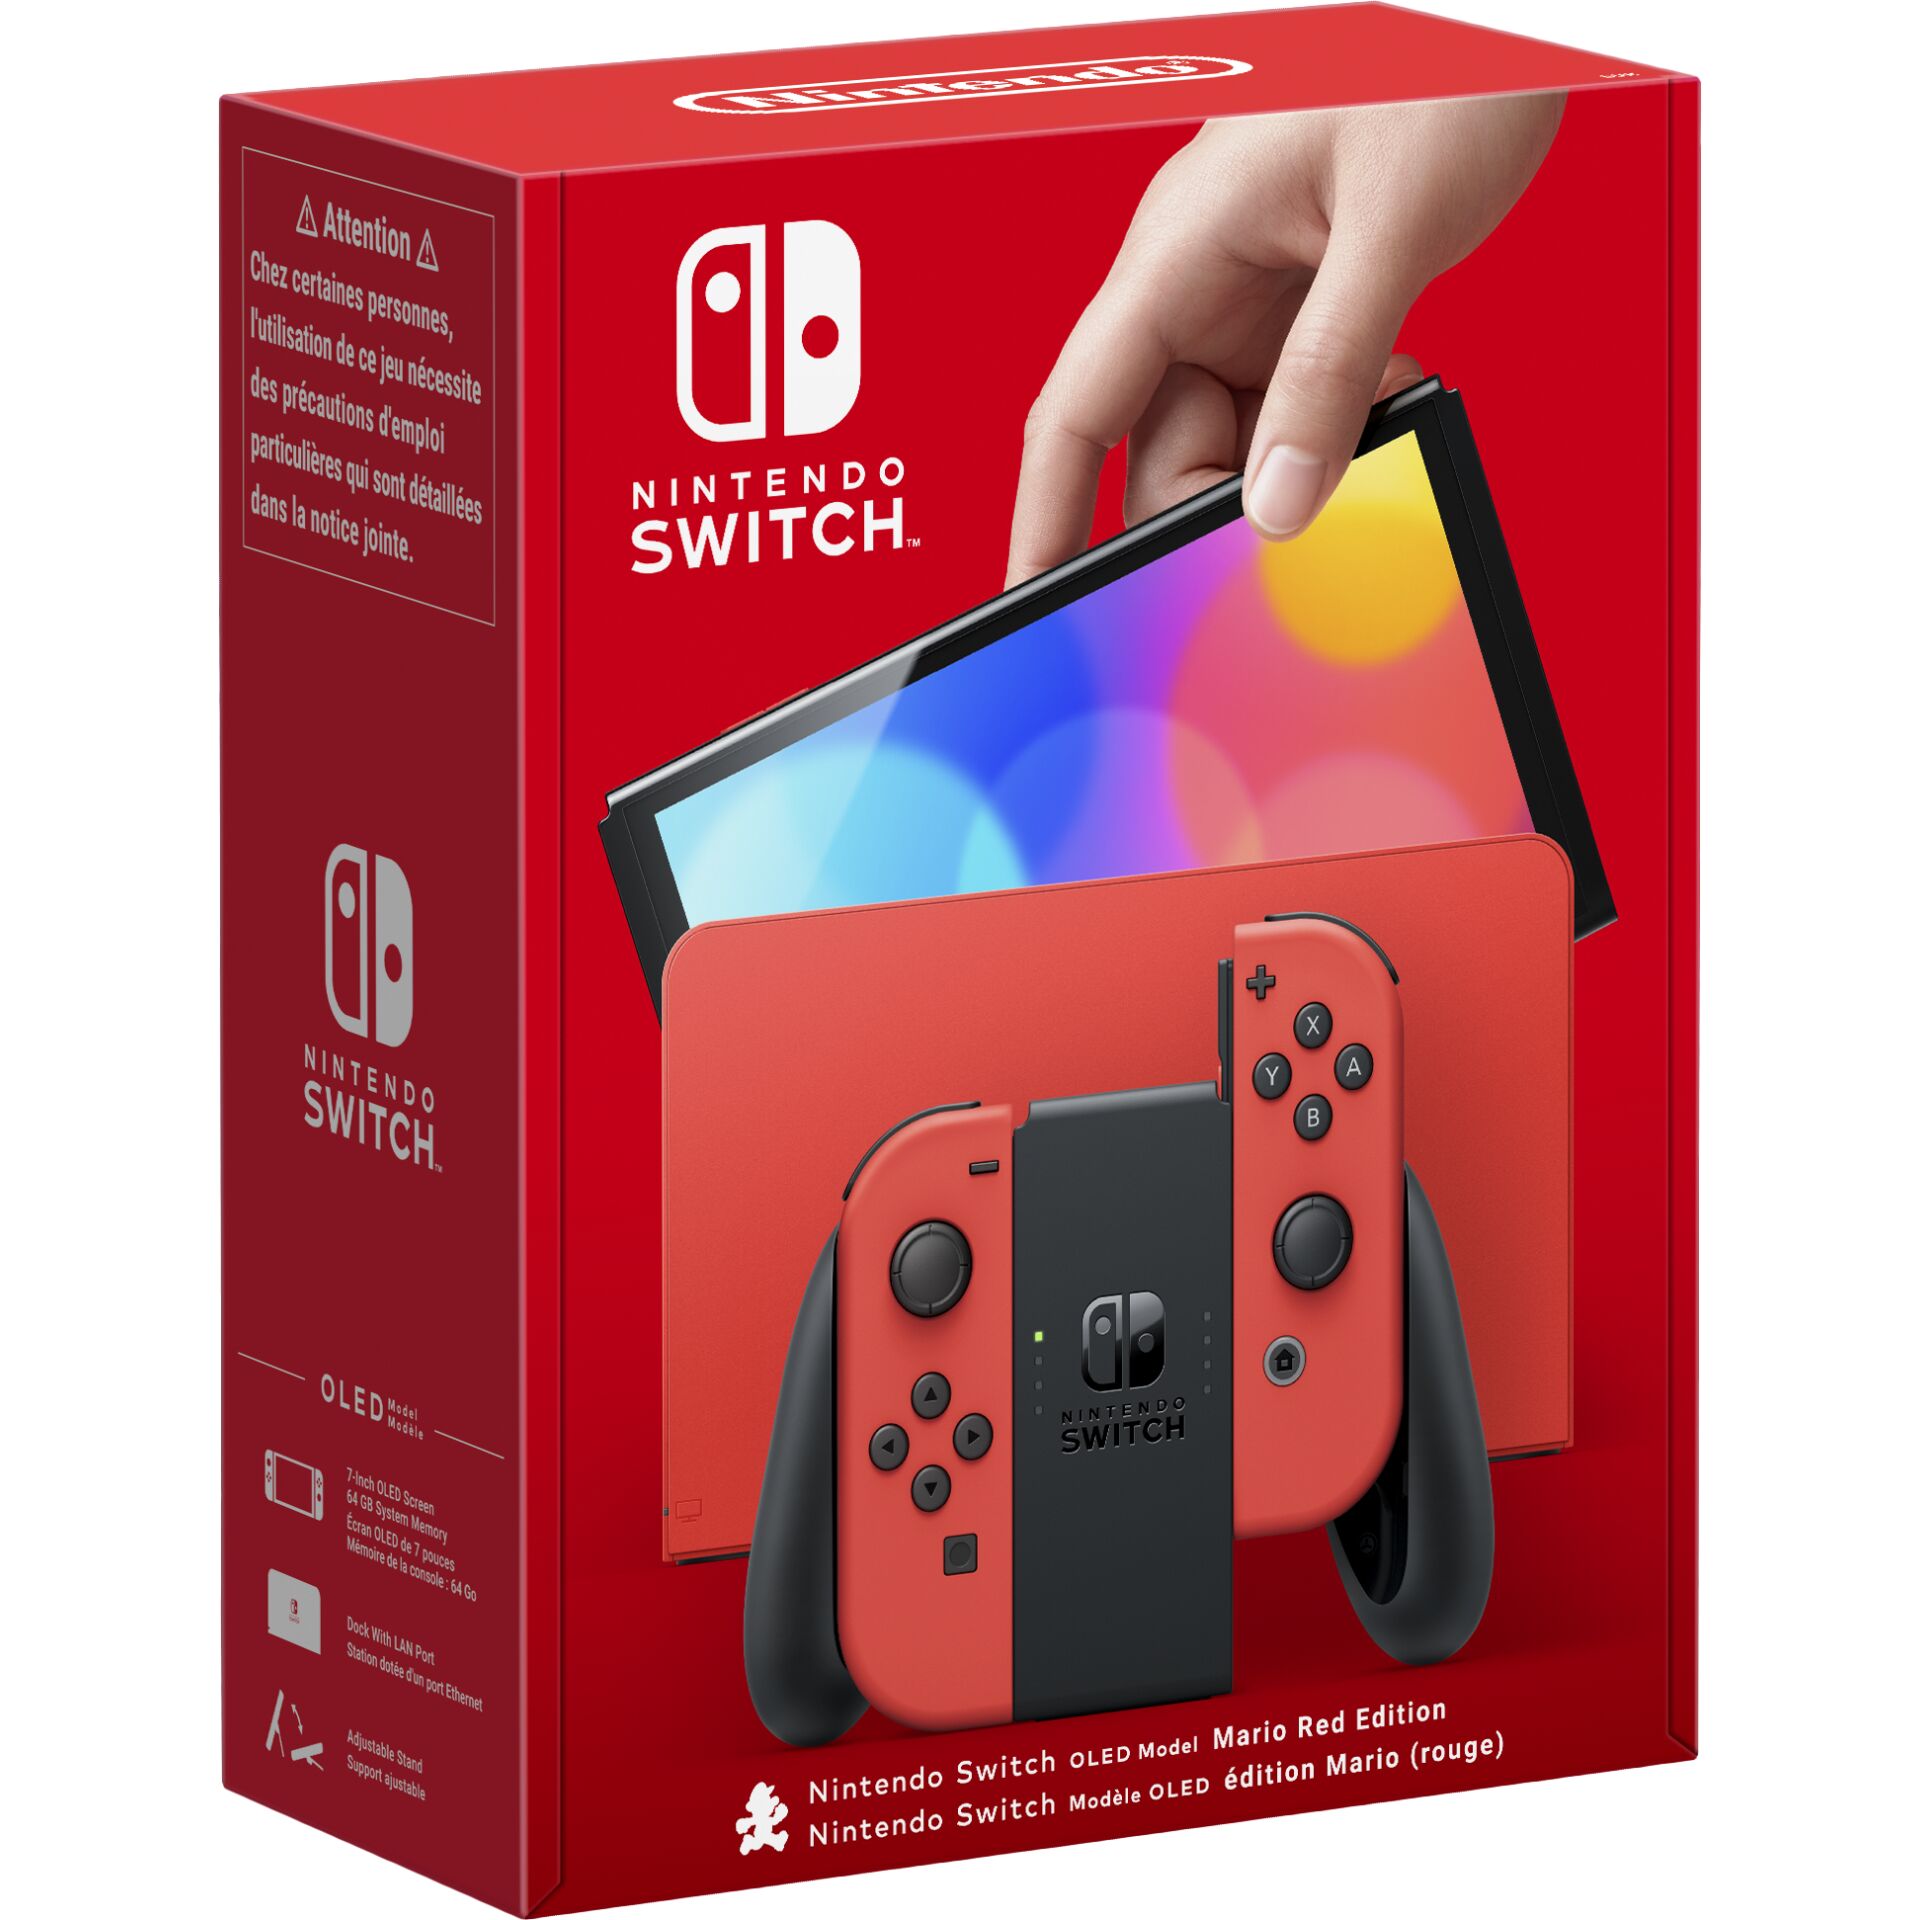 Nintendo Switch - OLED Model - Mario Red Edition portable game console 17.8 cm (7) 64 GB Touchscreen Wi-Fi